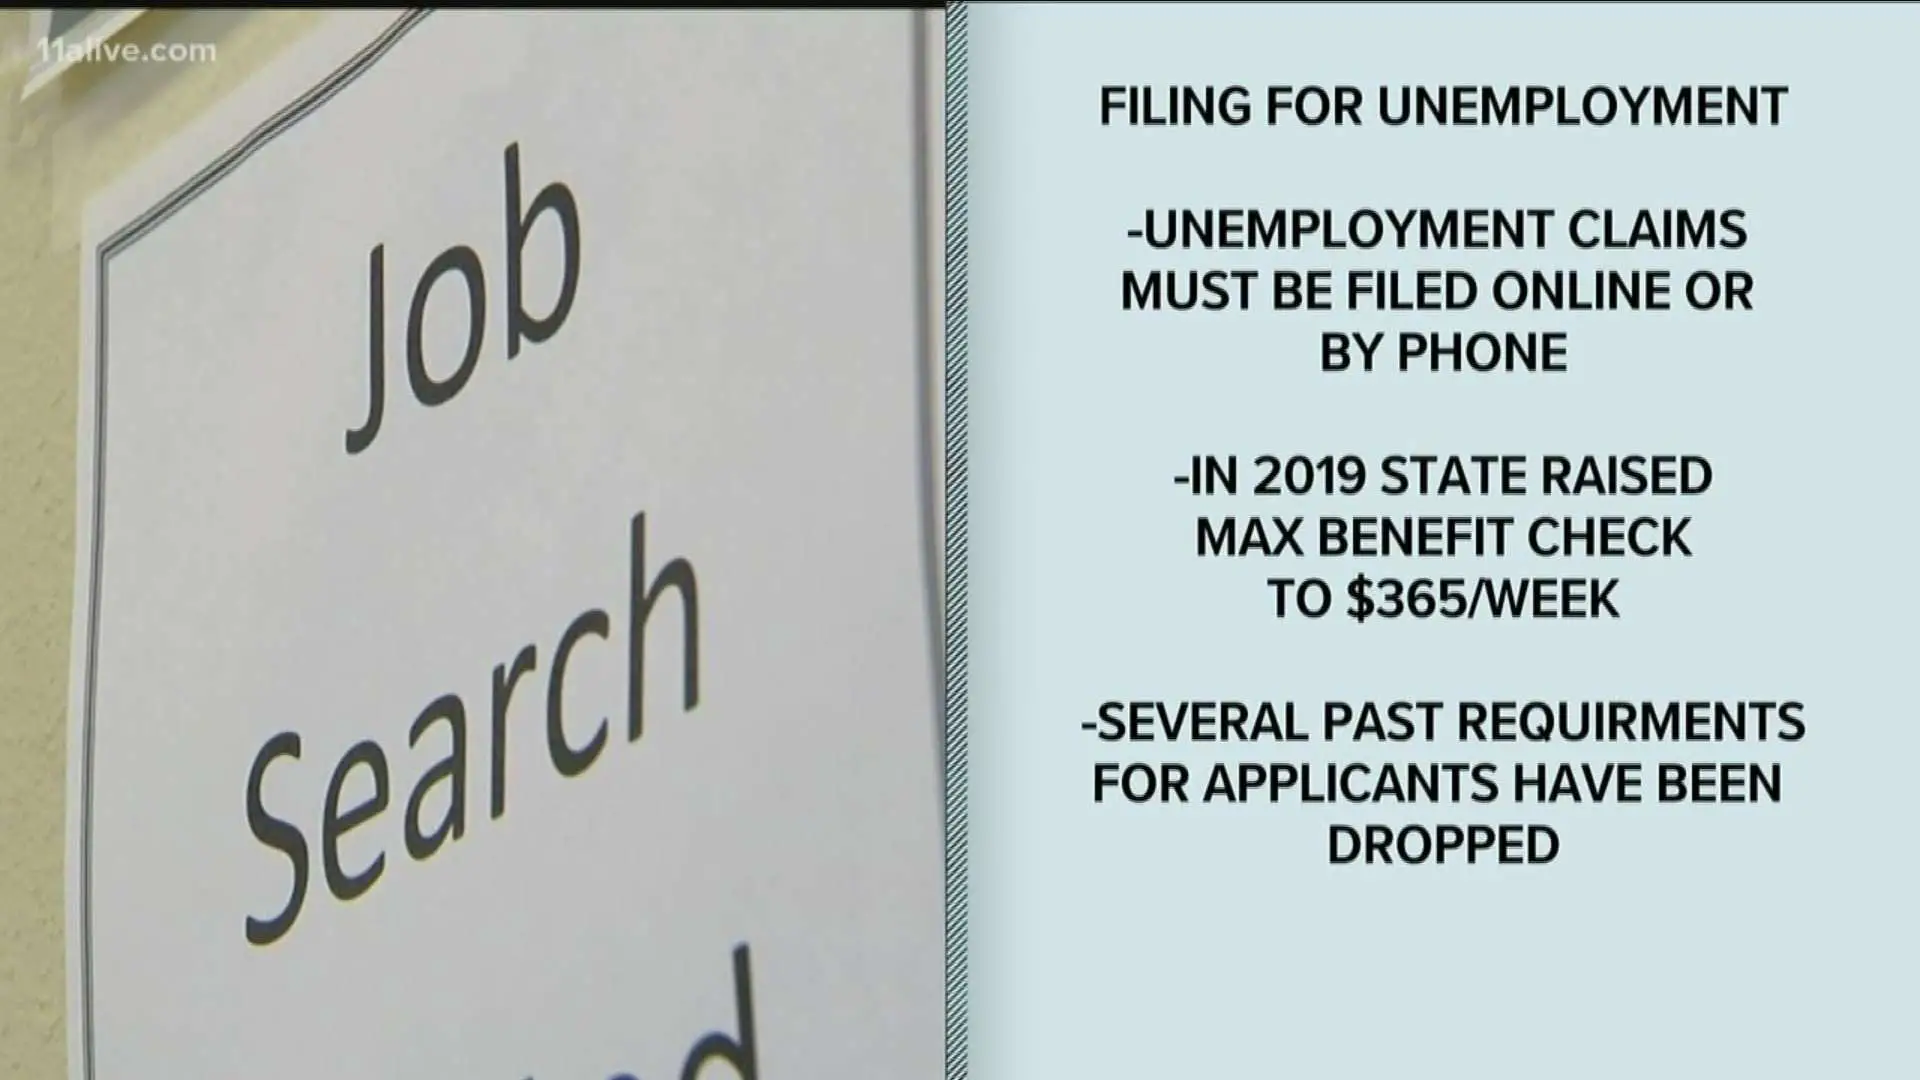 Georgia unemployment benefits, new rules amid COVID